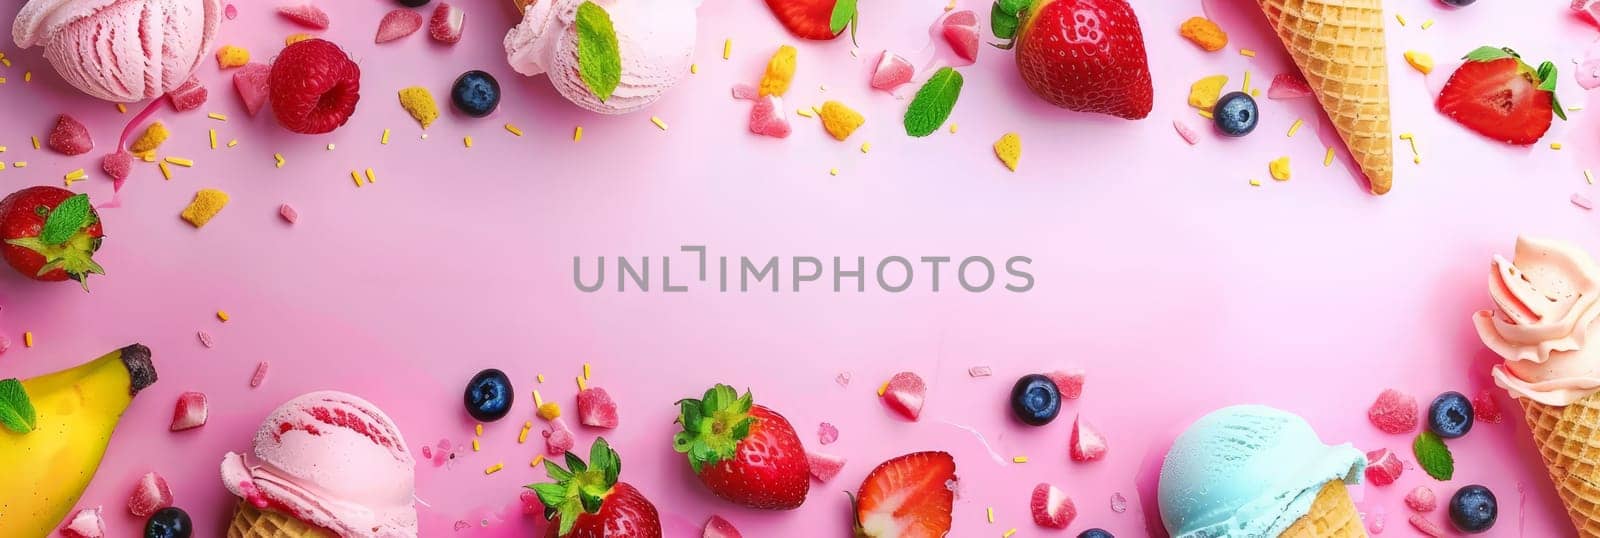 A colorful assortment of ice cream, fruit, and other treats on a pink background. Concept of fun and indulgence, inviting viewers to enjoy the delicious treats